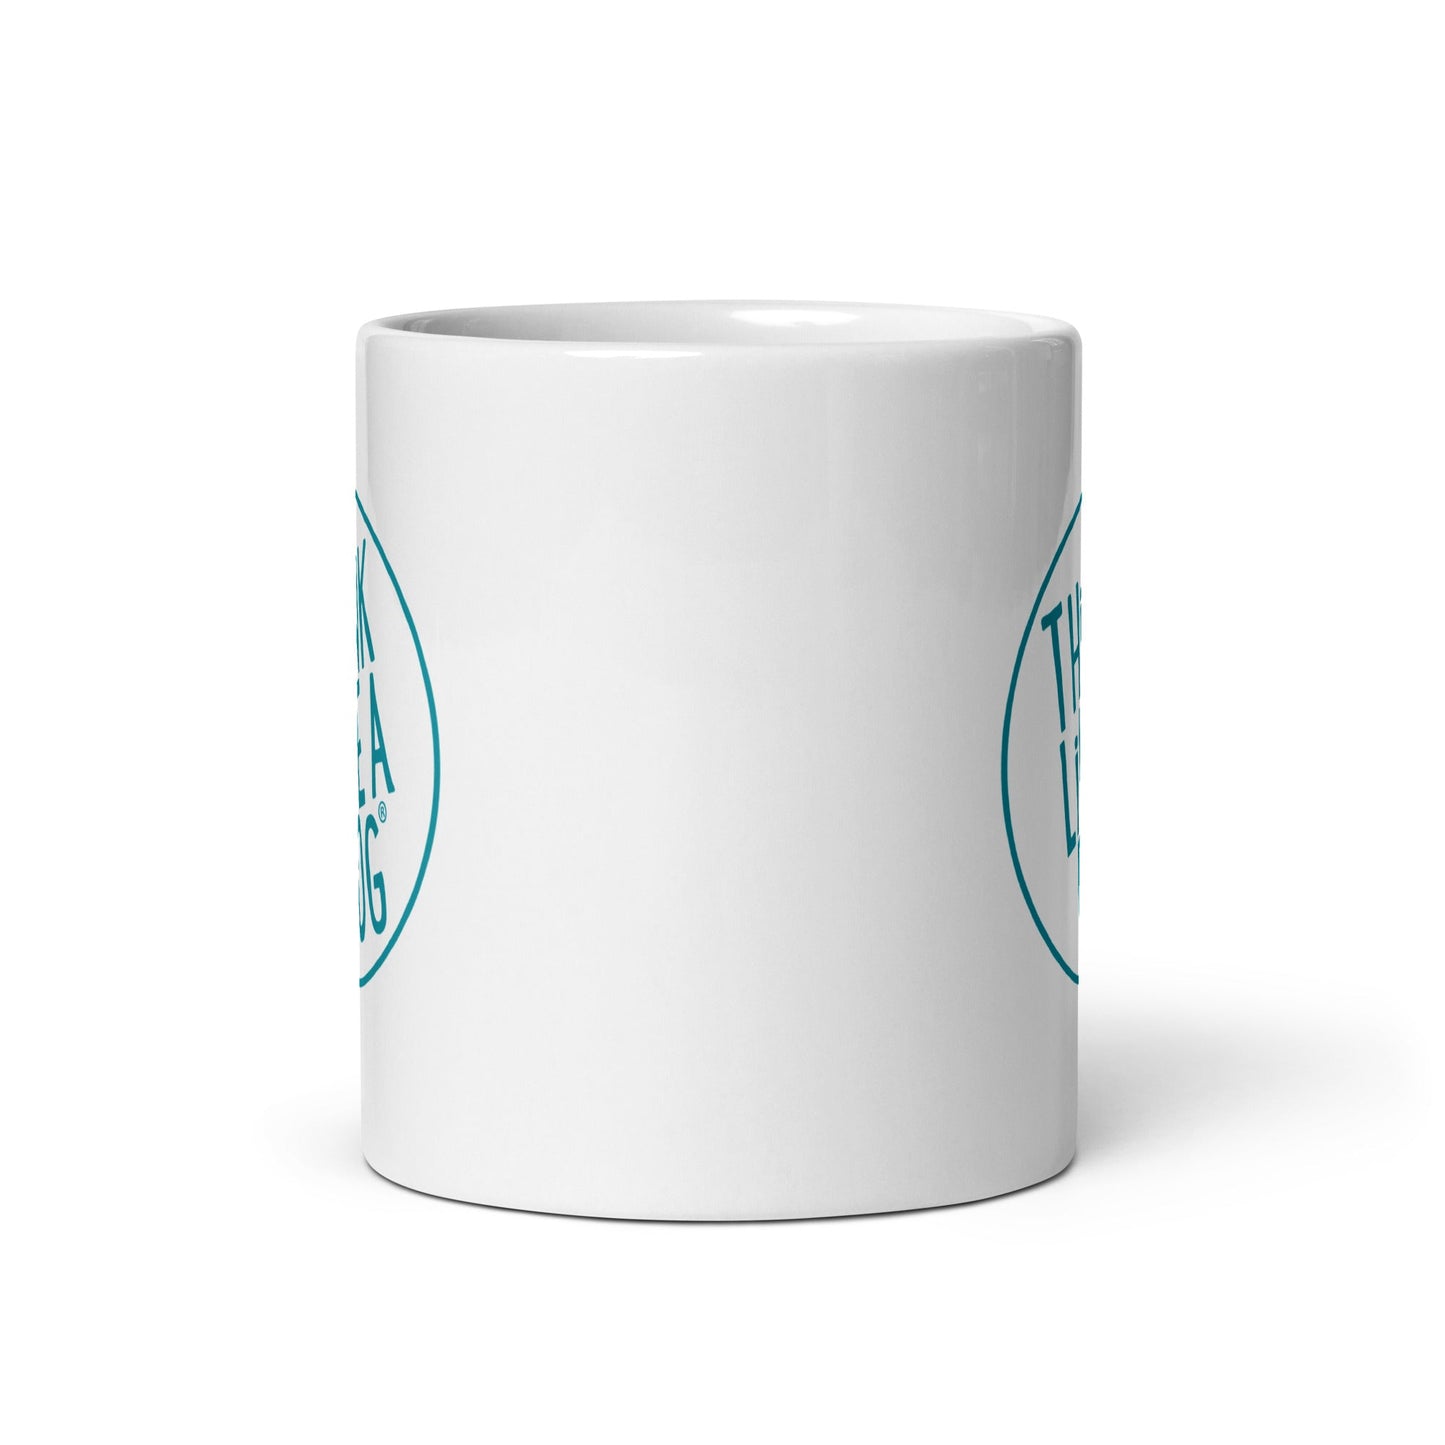 White glossy mug with blue "tea bags" text and THiNK LiKE A DOG® logo on both sides, perfect for dog lovers.